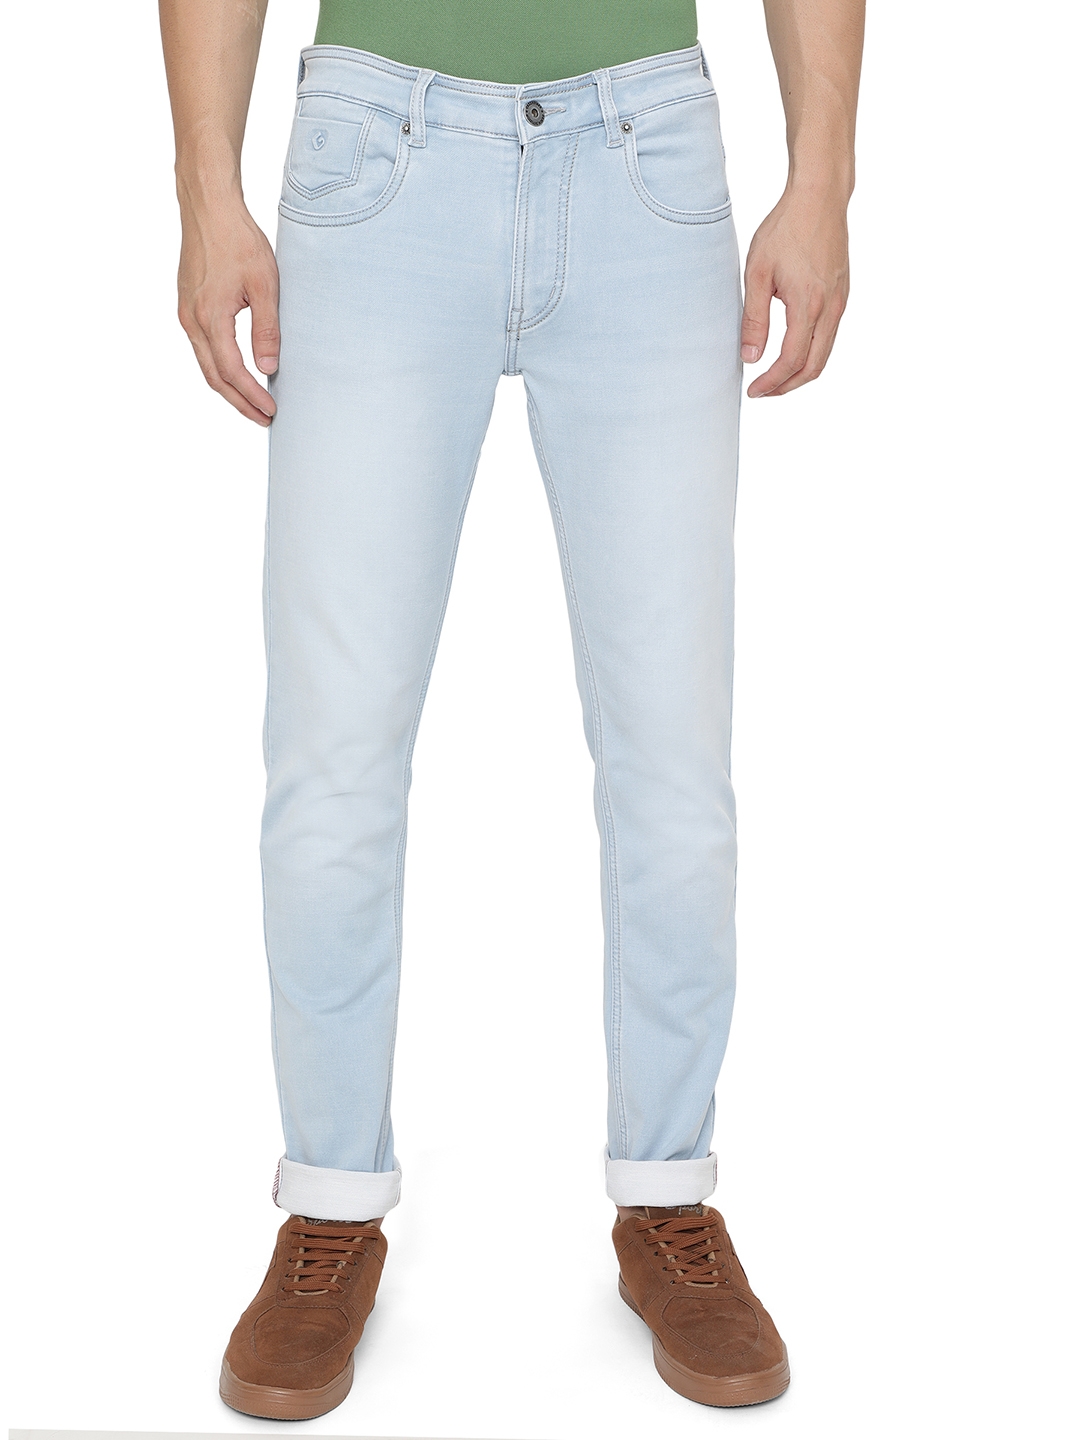 Greenfibre | Ice Blue Solid Narrow Fit Jeans | Greenfibre